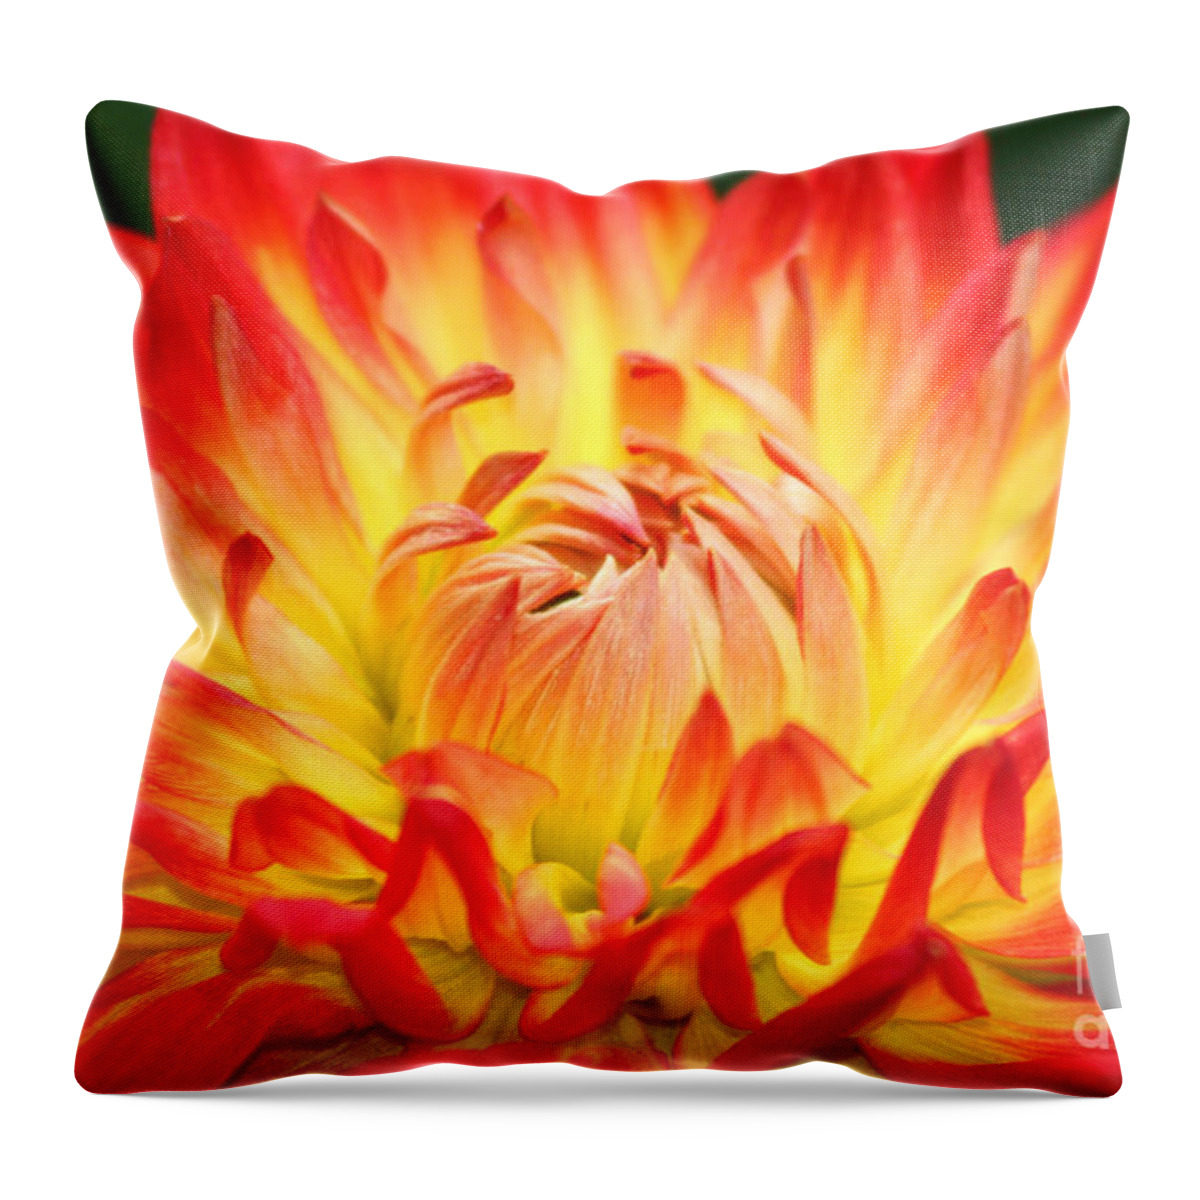 Flower Throw Pillow featuring the photograph Img 0023 Flor En Rojo Detalle by Francisco Pulido